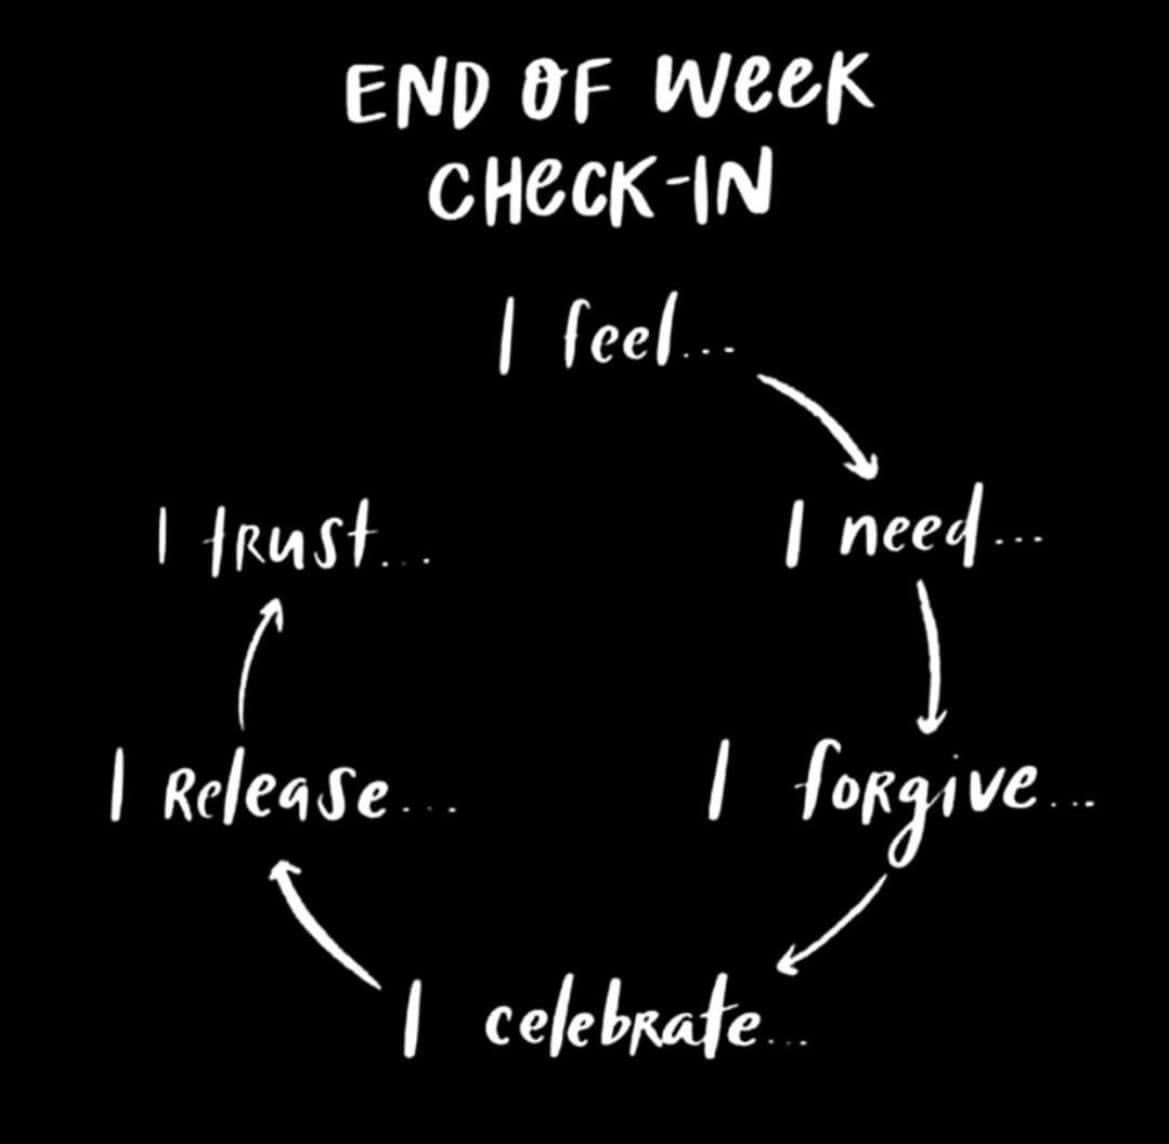 As the week comes to a close, don't forget to check-in with yourself.
#Process #EnjoyYourDay
#yourmentalhealthmatters